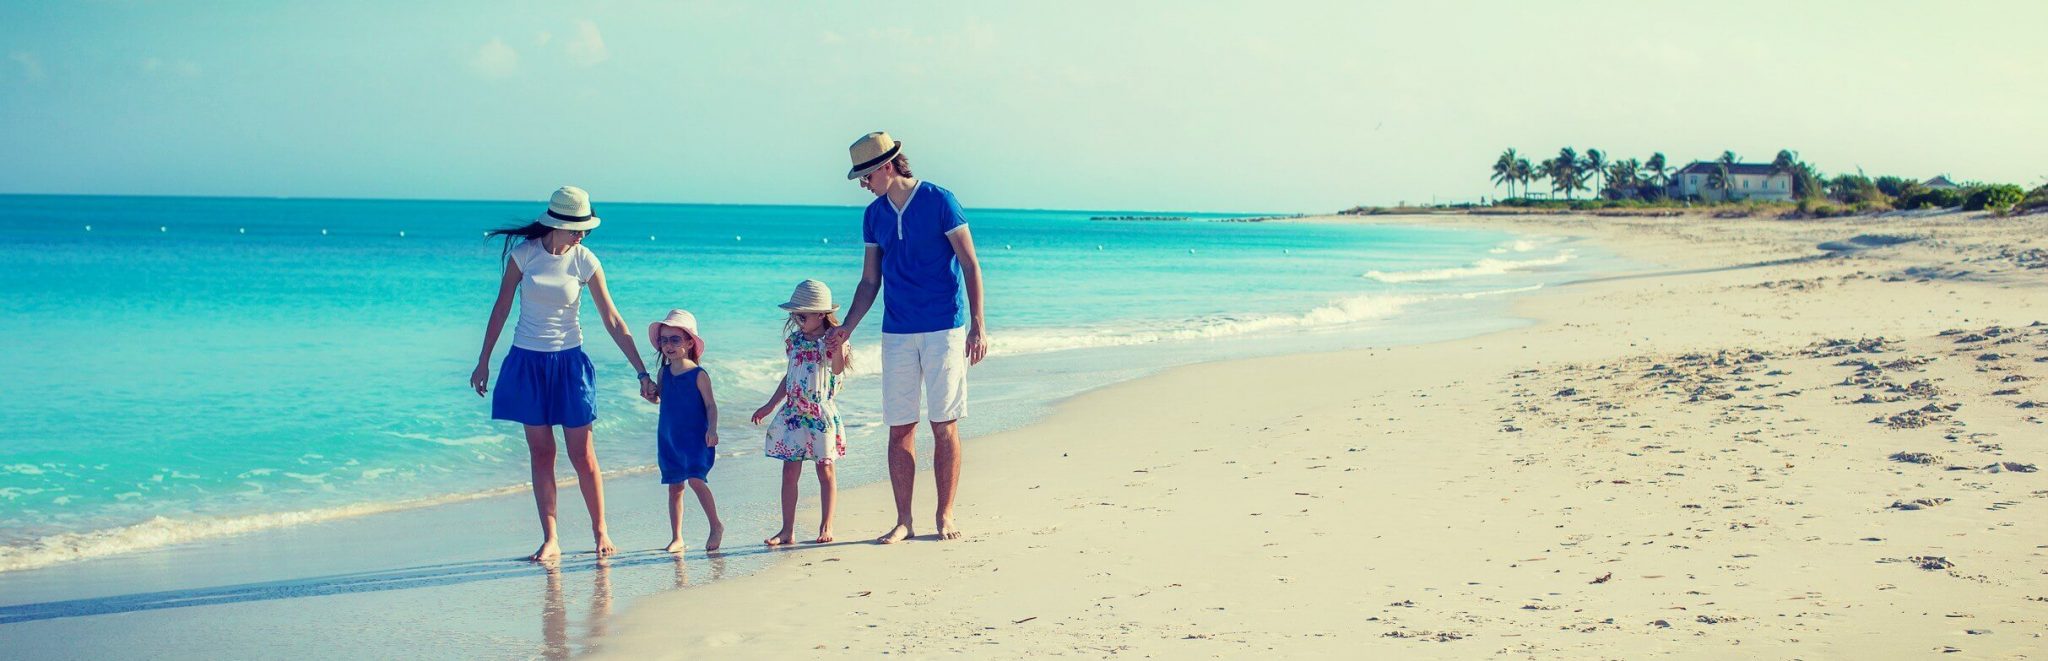 St Martin - St Maartin - Luxury Family Vacation - AssistAnt